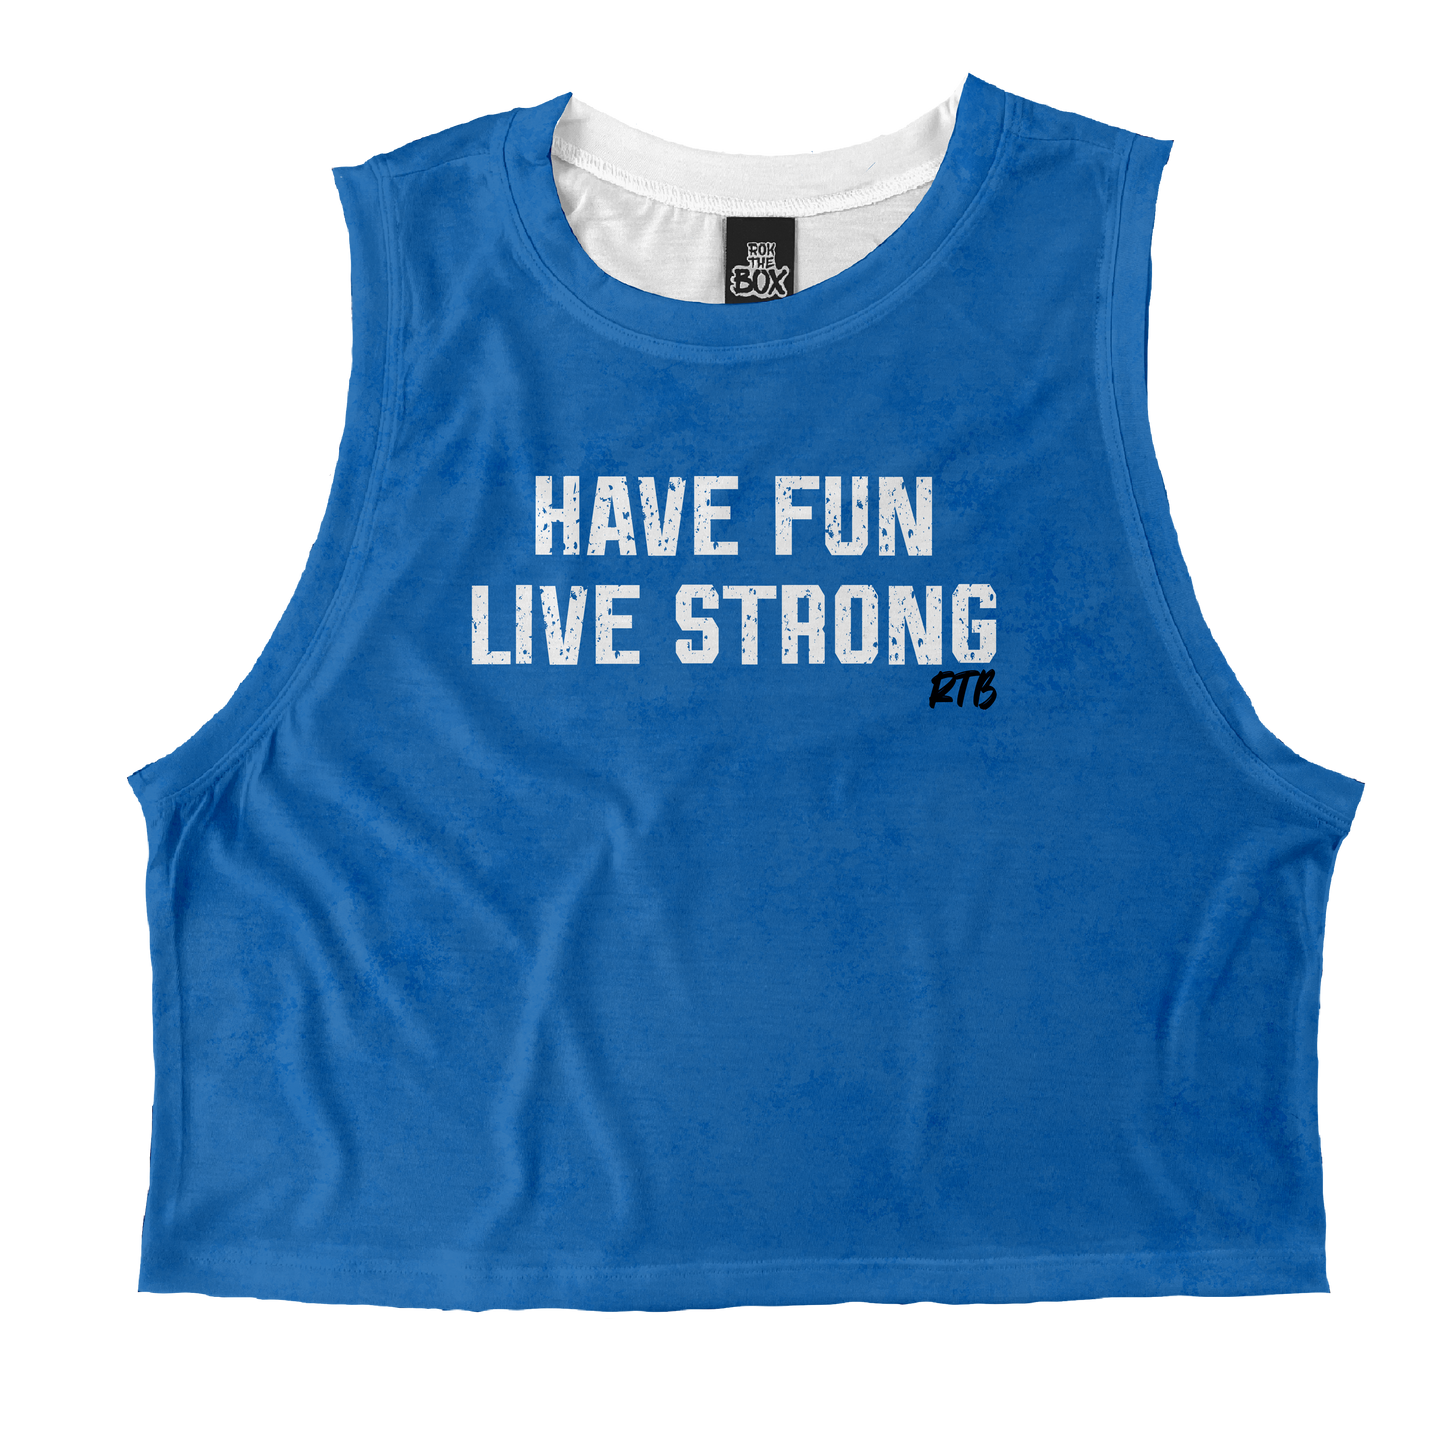 Have Fun Live Strong (blue) Tops